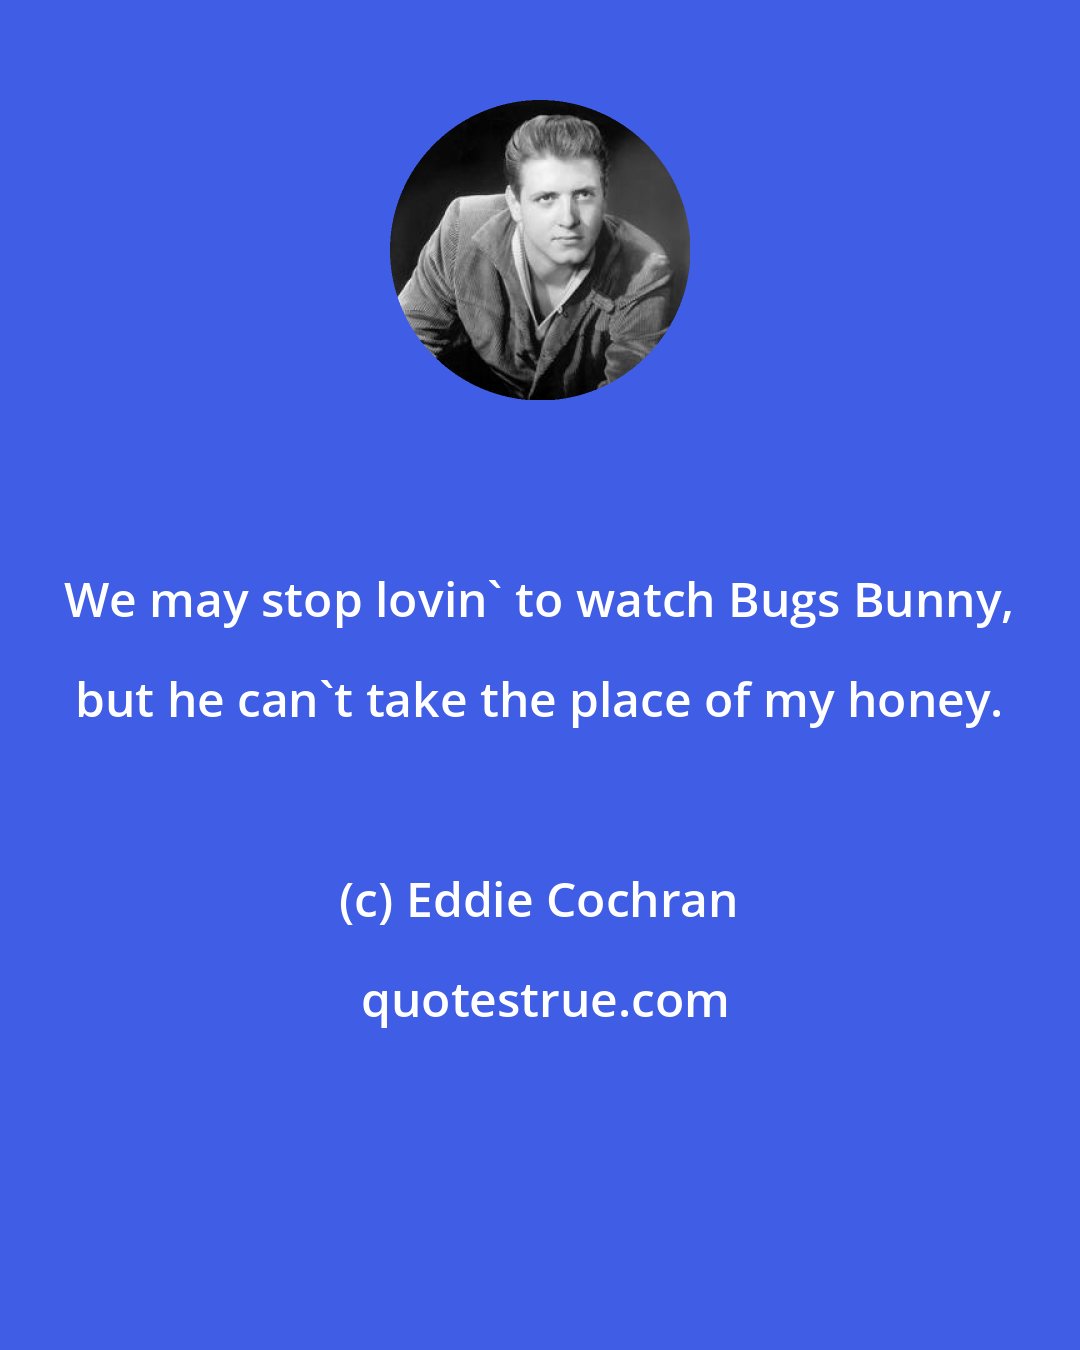 Eddie Cochran: We may stop lovin' to watch Bugs Bunny, but he can't take the place of my honey.